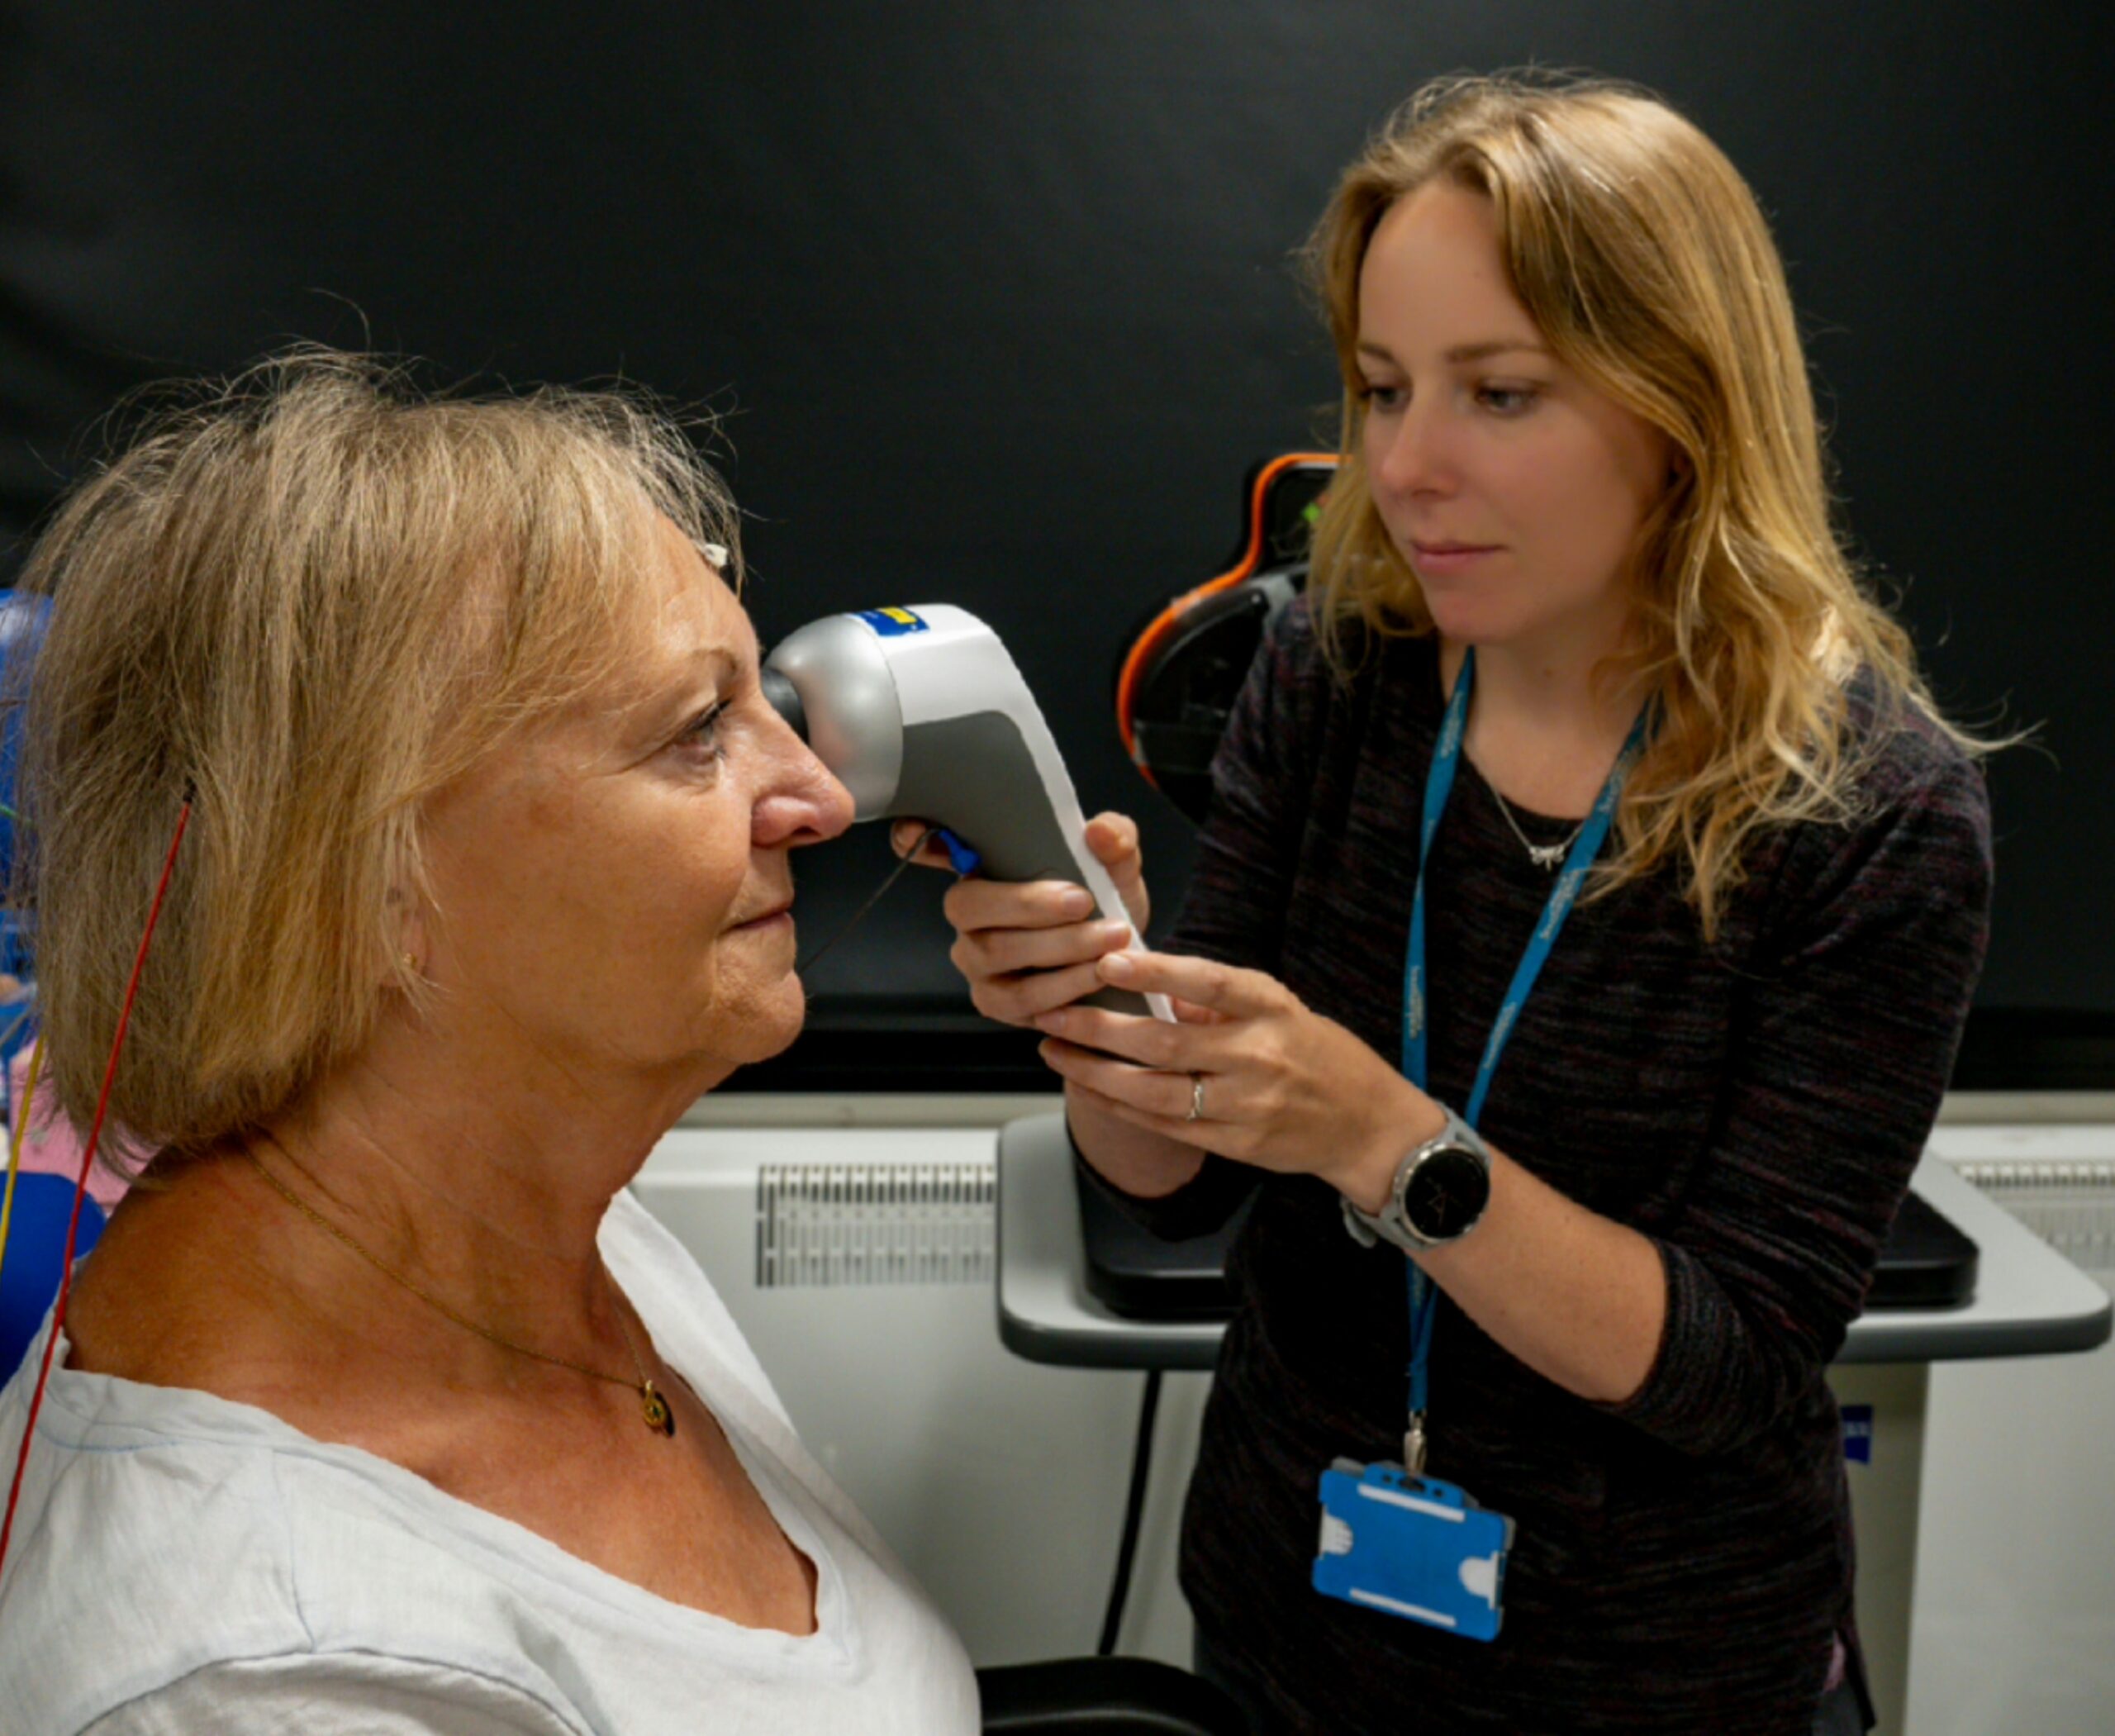 An eye care practitioner is testing a patient's eyes using a RETeval device.